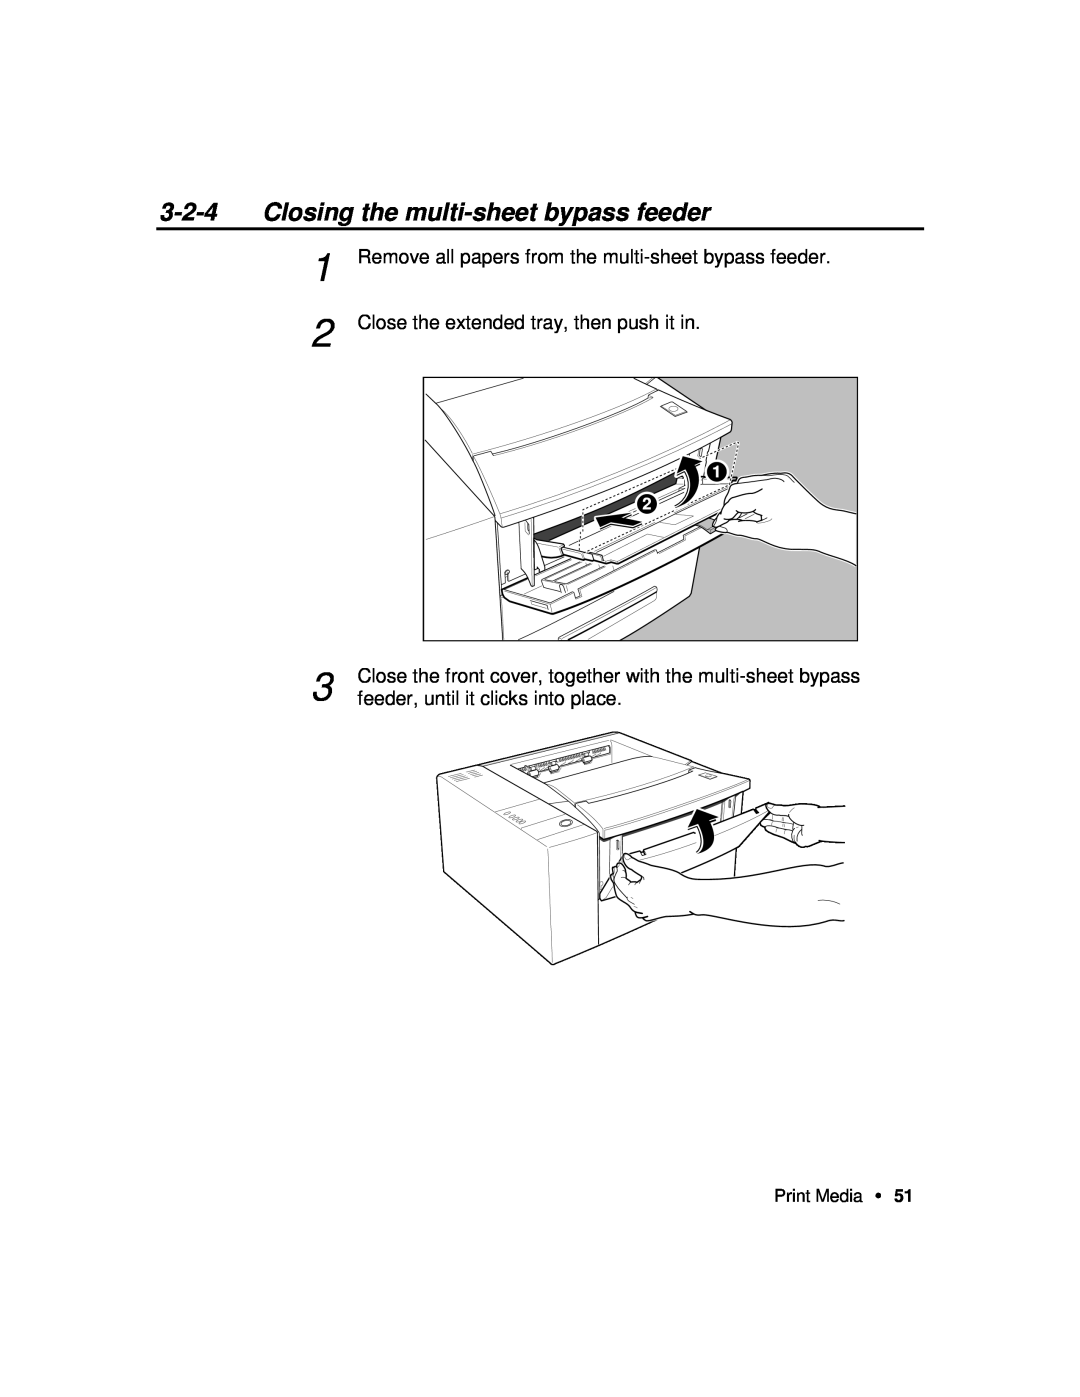 Xerox P12 manual Closing the multi-sheet bypass feeder, Remove all papers from the multi-sheet bypass feeder 